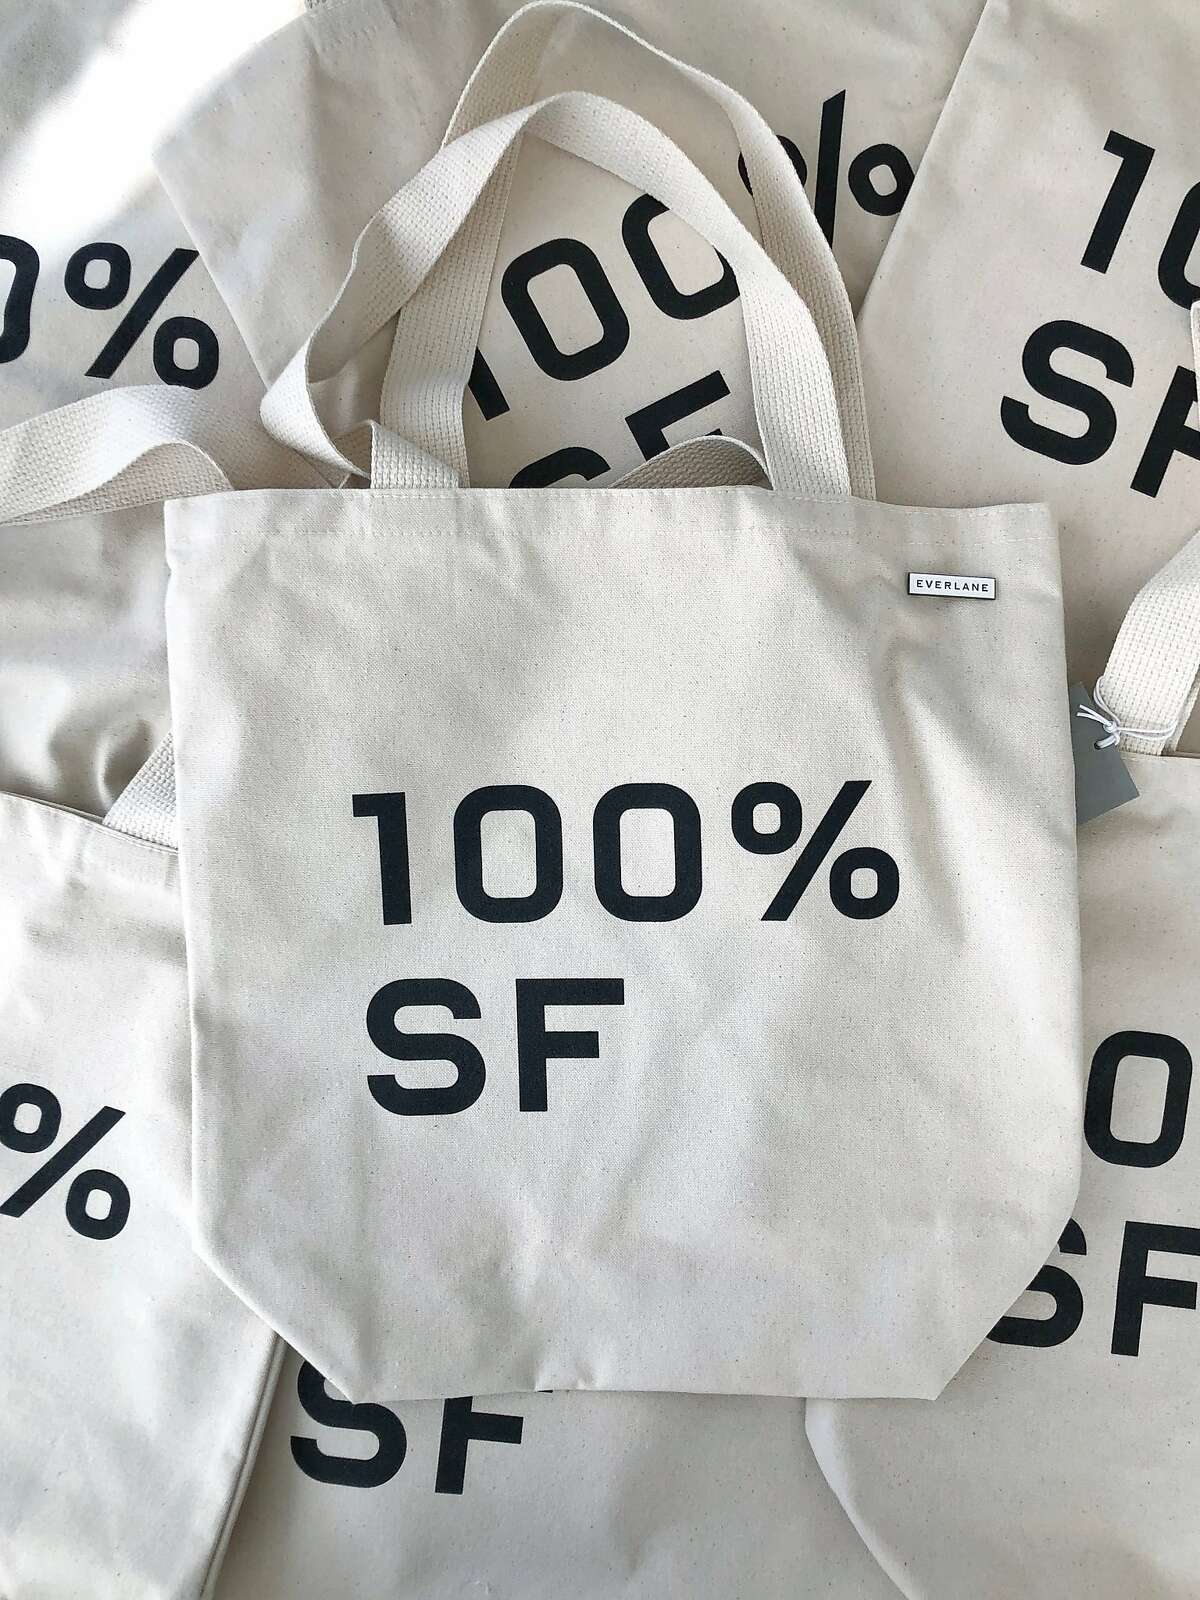 Everlane�is opening a permanent San Francisco brick-and-mortar store at 416 Valencia St., and will offer T-shirts and bags exclusive to the location.